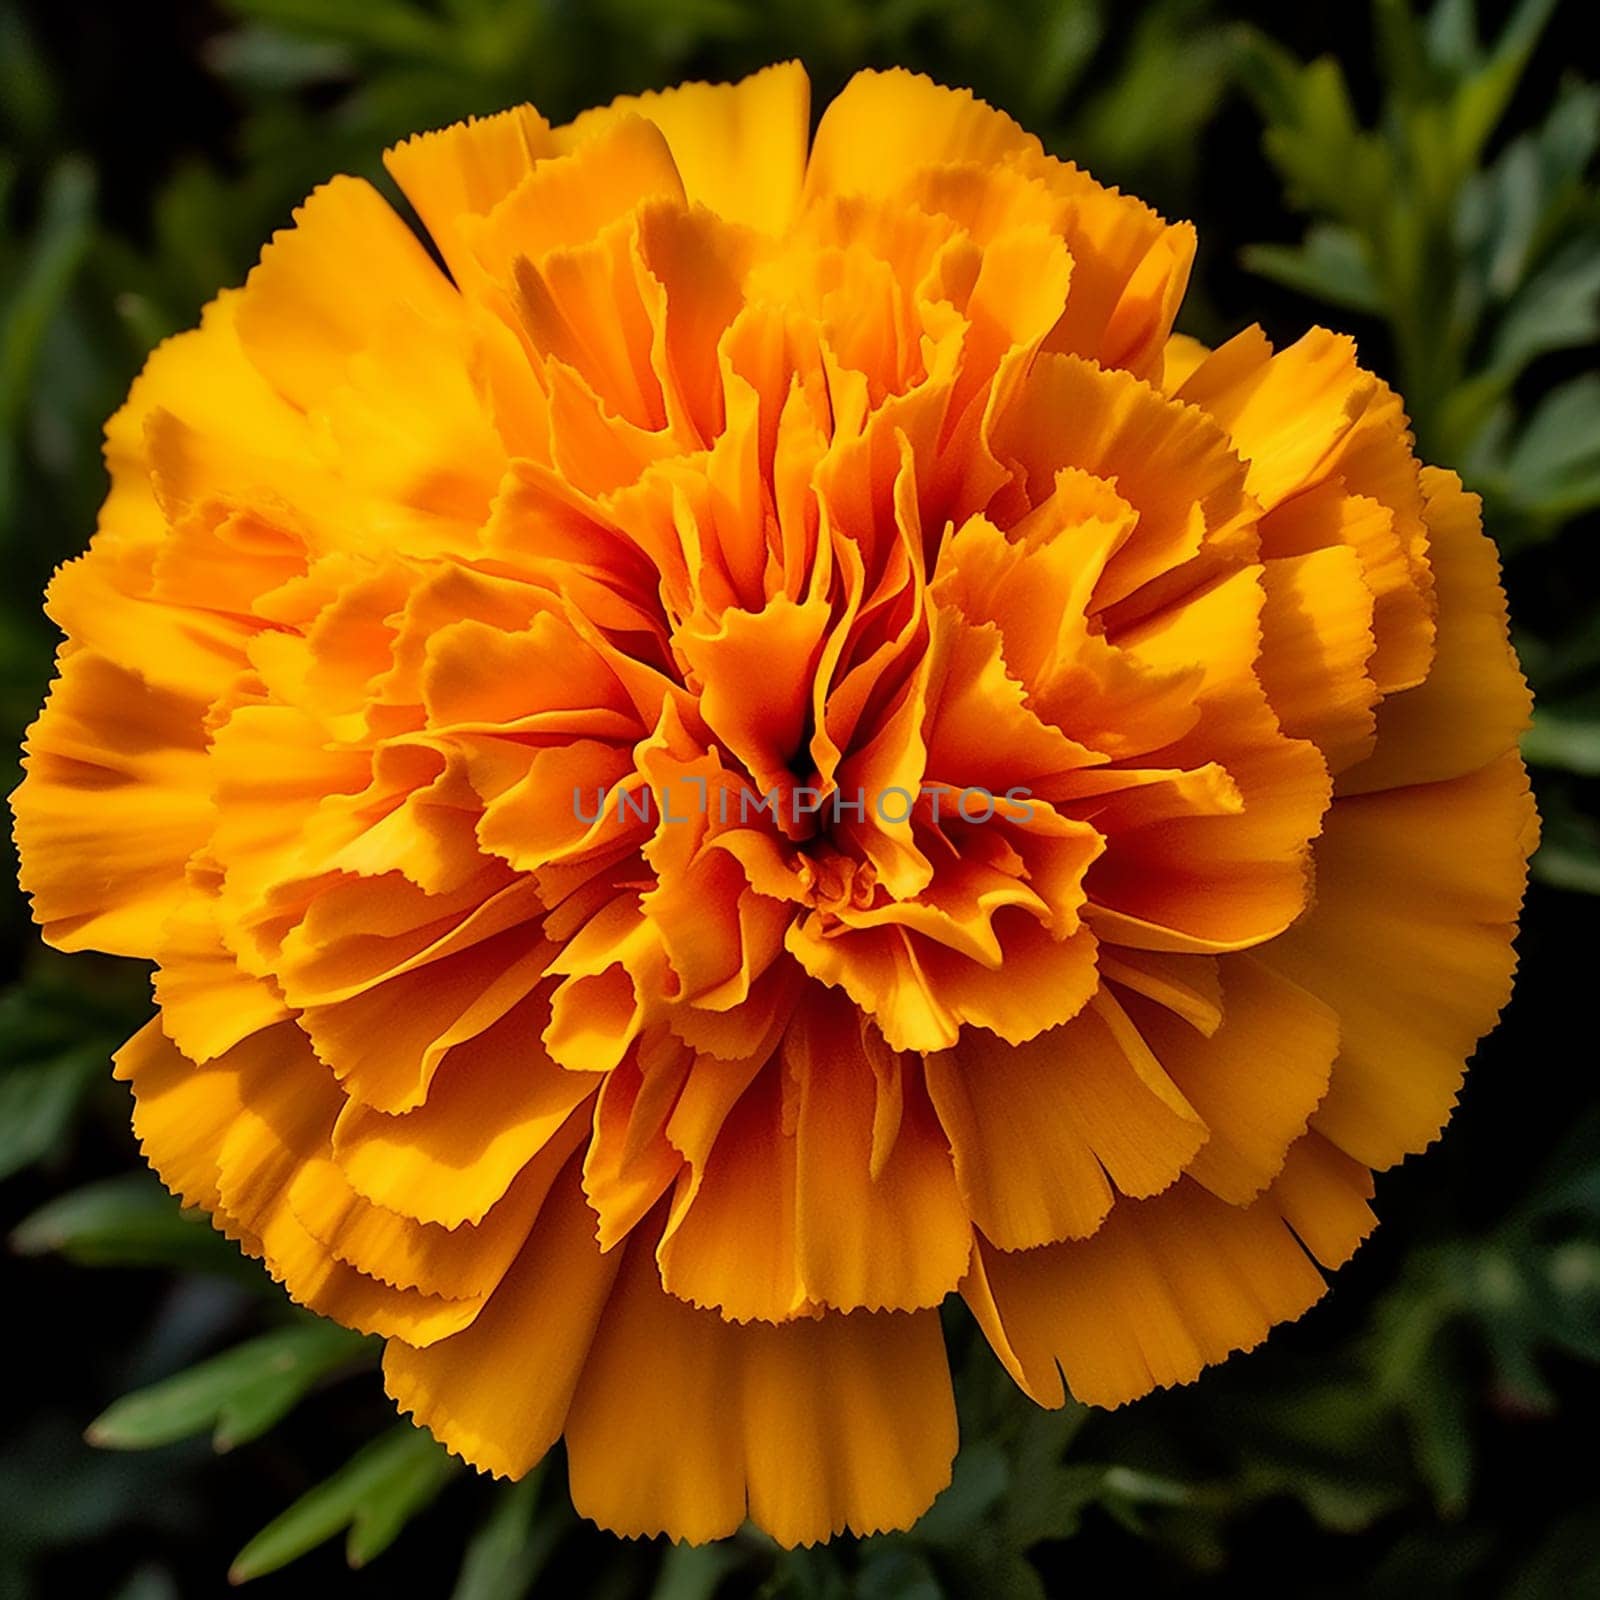 Vibrant orange marigold with lush petals in full bloom by Hype2art